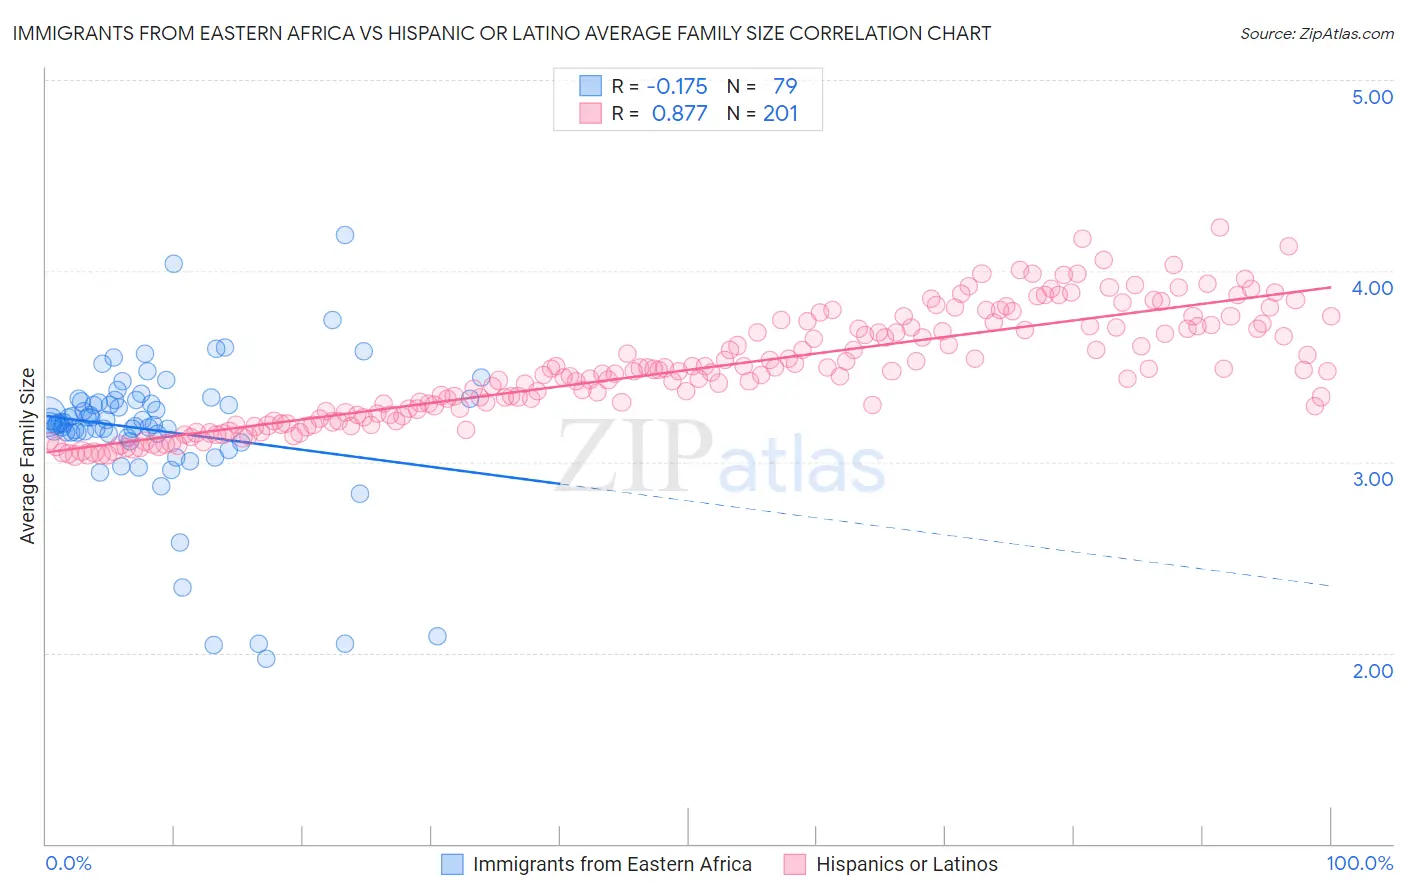 Immigrants from Eastern Africa vs Hispanic or Latino Average Family Size